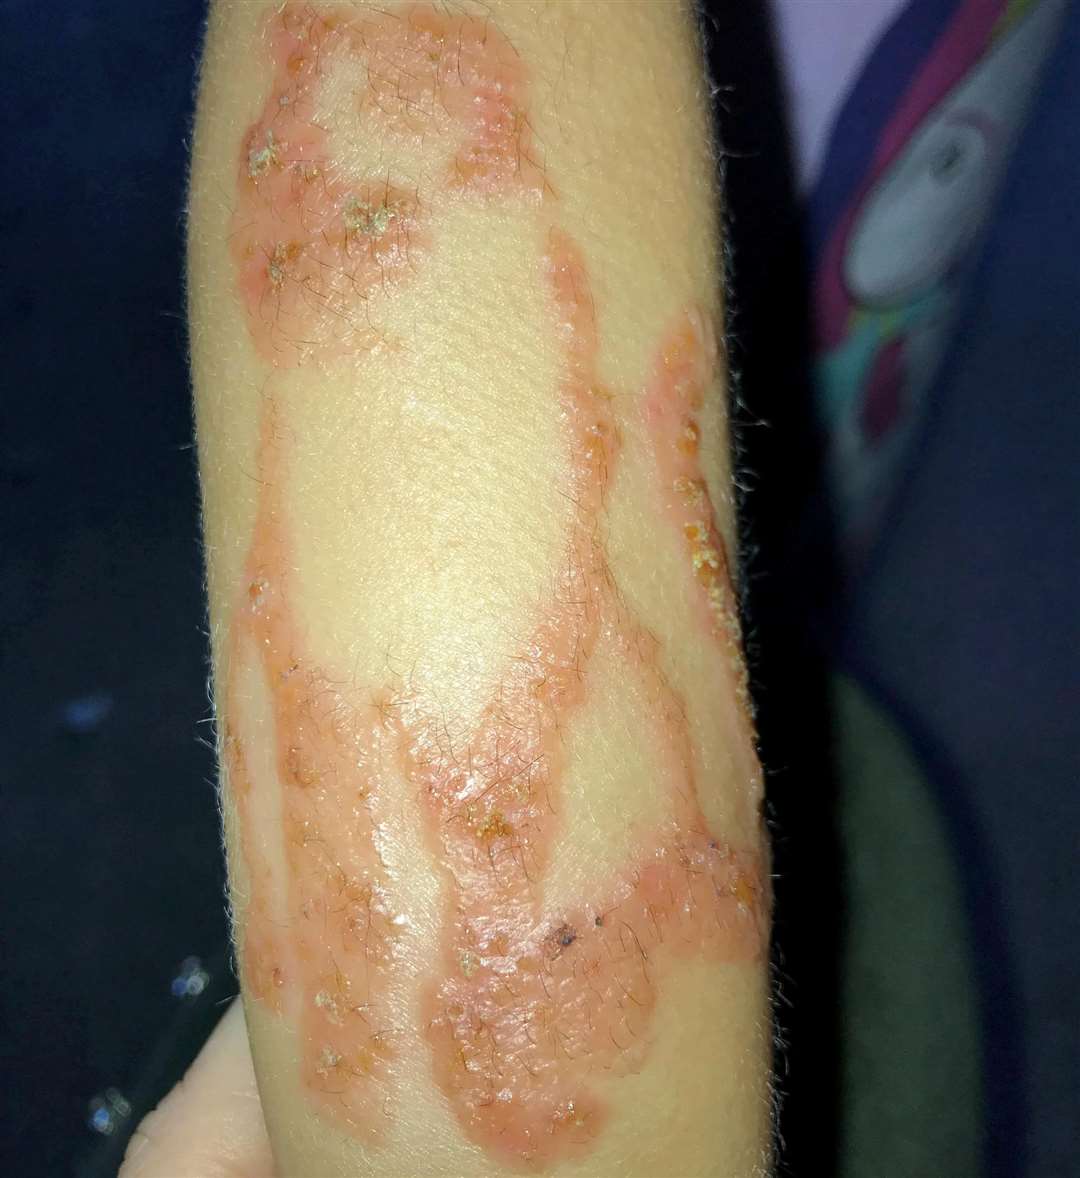 The henna tattoo caused Freja's arm to blister and burn (5886656)